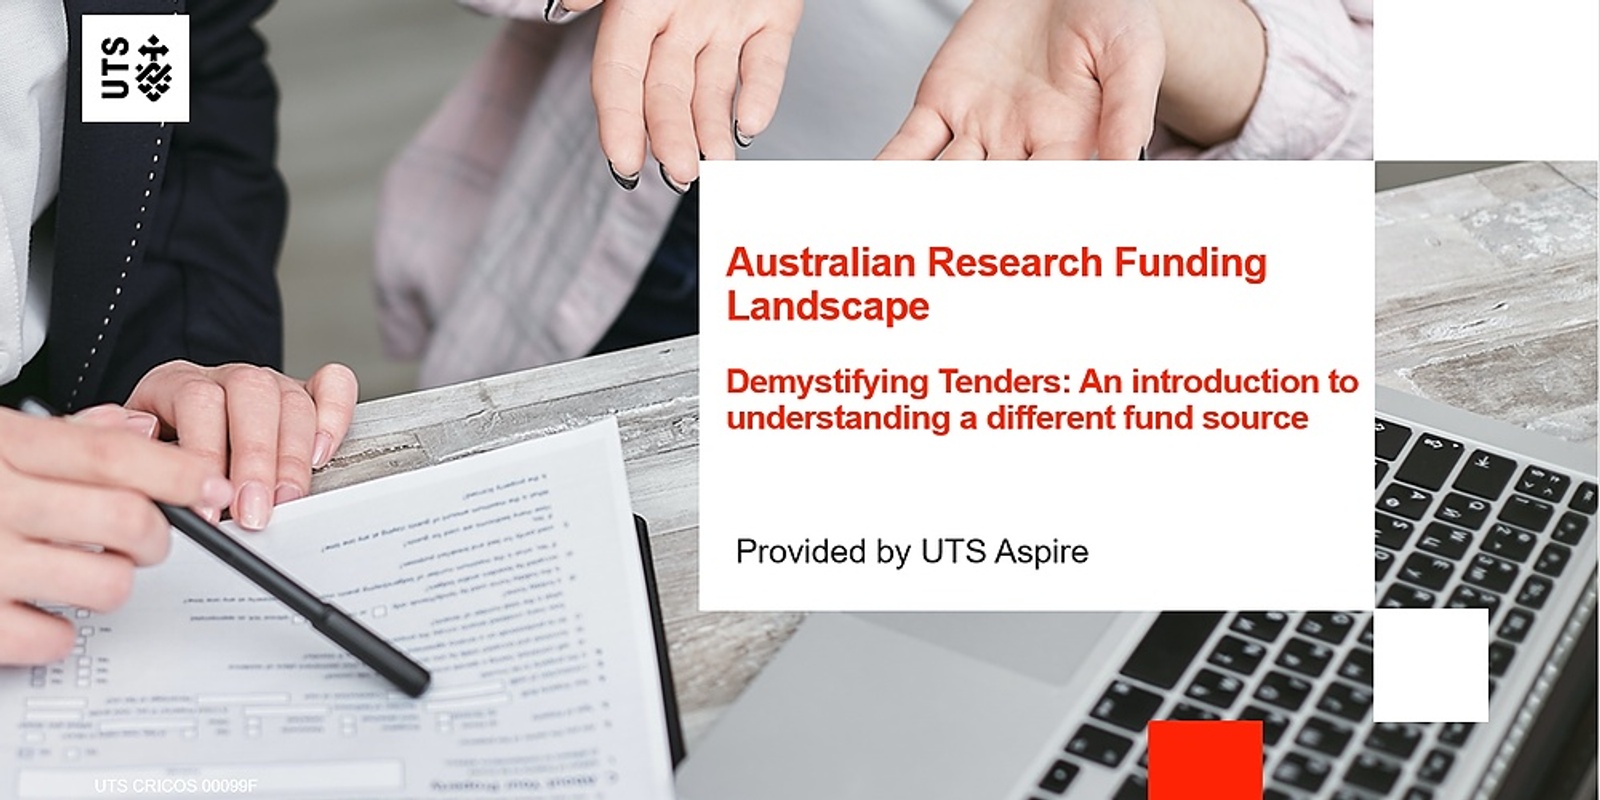 ARFL- Demystifying Tenders: An introduction to understanding a different fund source